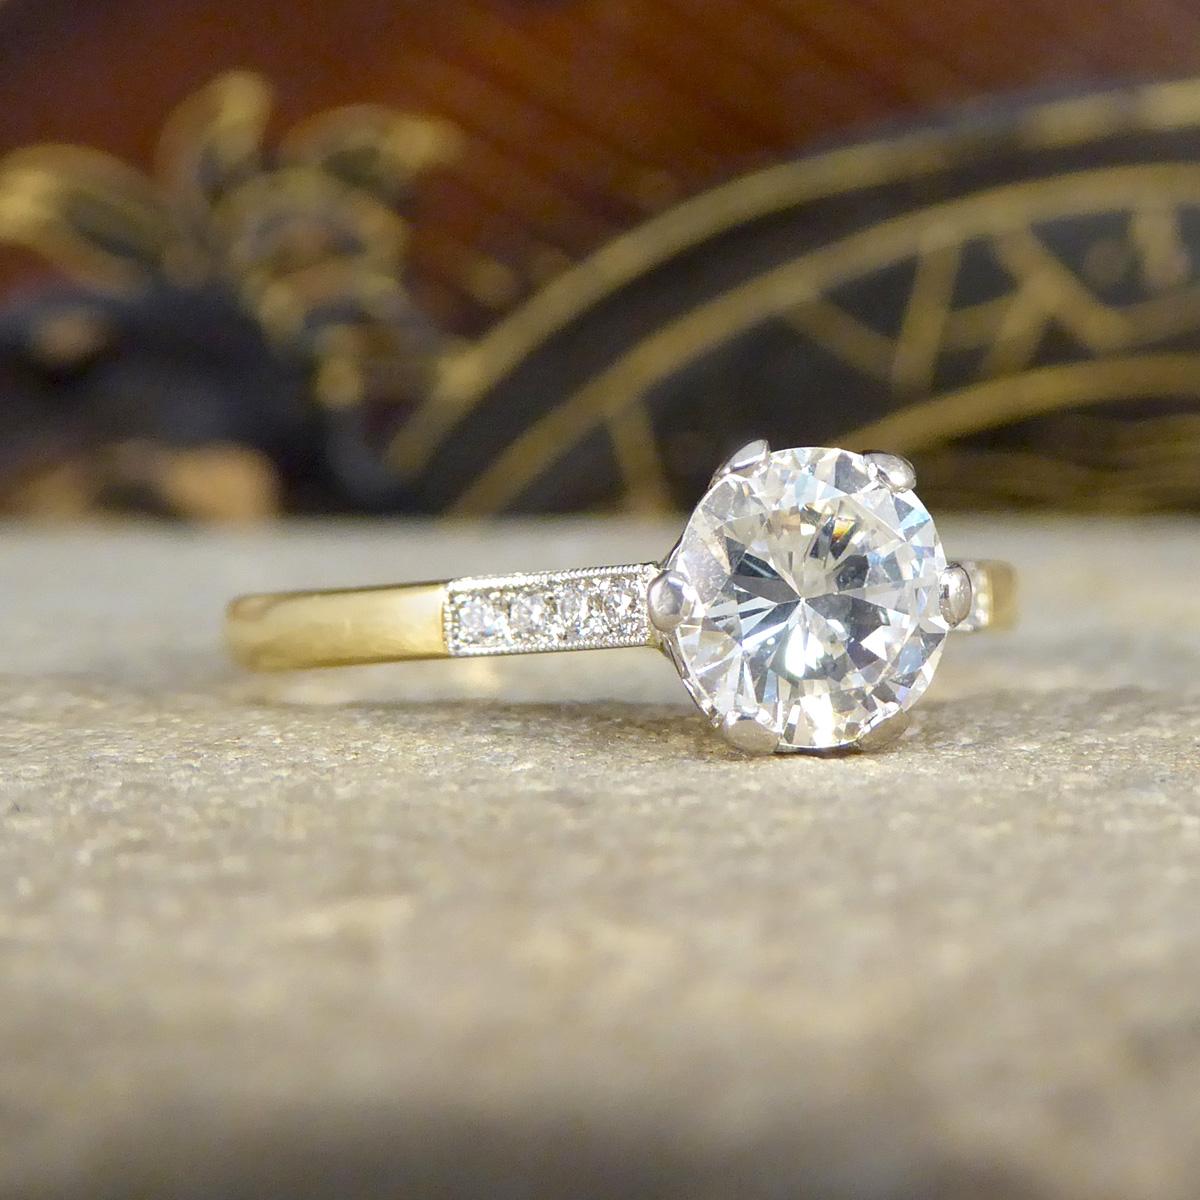 A beautifully classic Diamond engagement ring. Taking centre stage in this ring is a Brilliant Cut Diamond weighing approximately 0.90ct in a 6 claw setting with a beautiful aesthetic assessed as SI2 in clarity and I in colour. The Diamond is sat in